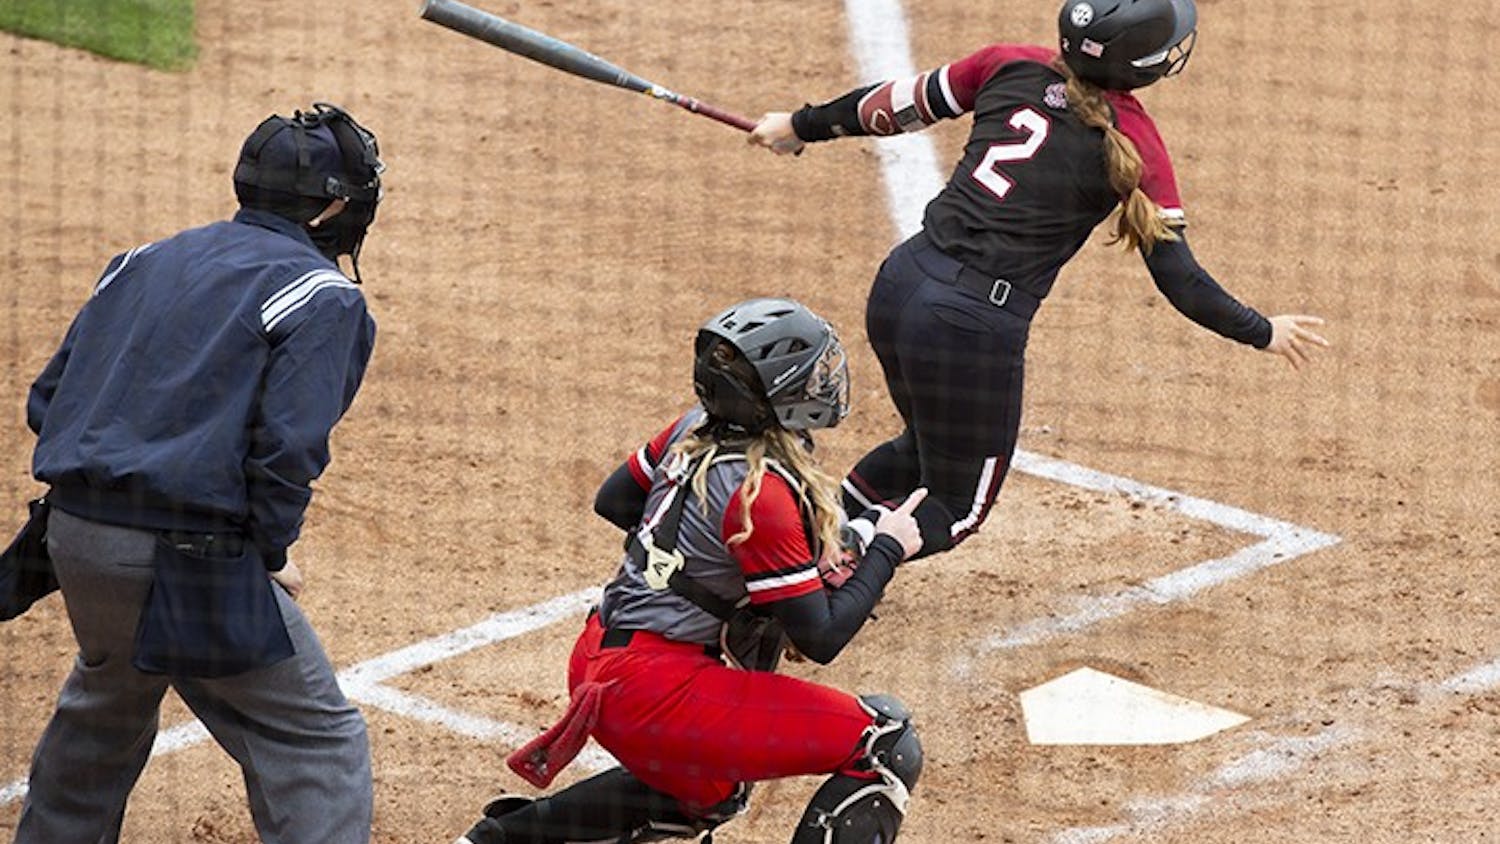 &nbsp;Graduate infielder Kenzi Maguire prepares to run after swinging at a ball from the opposing pitcher. South Carolina won 8-0 against Gardner-Webb University.&nbsp;